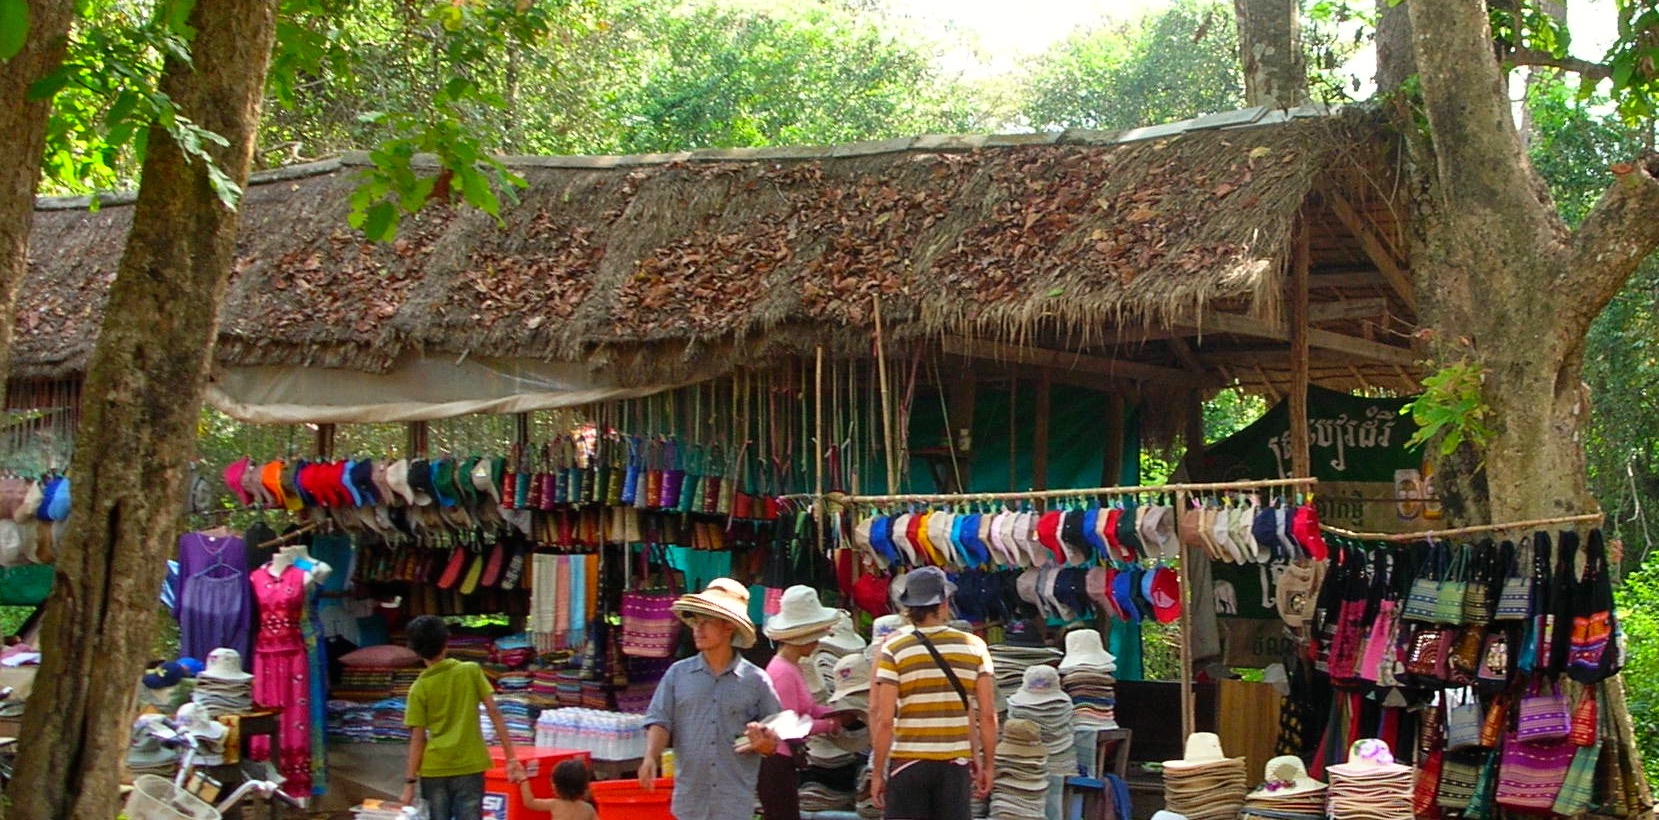 Typical market at Siem Reap. Photo by Marla Norman.